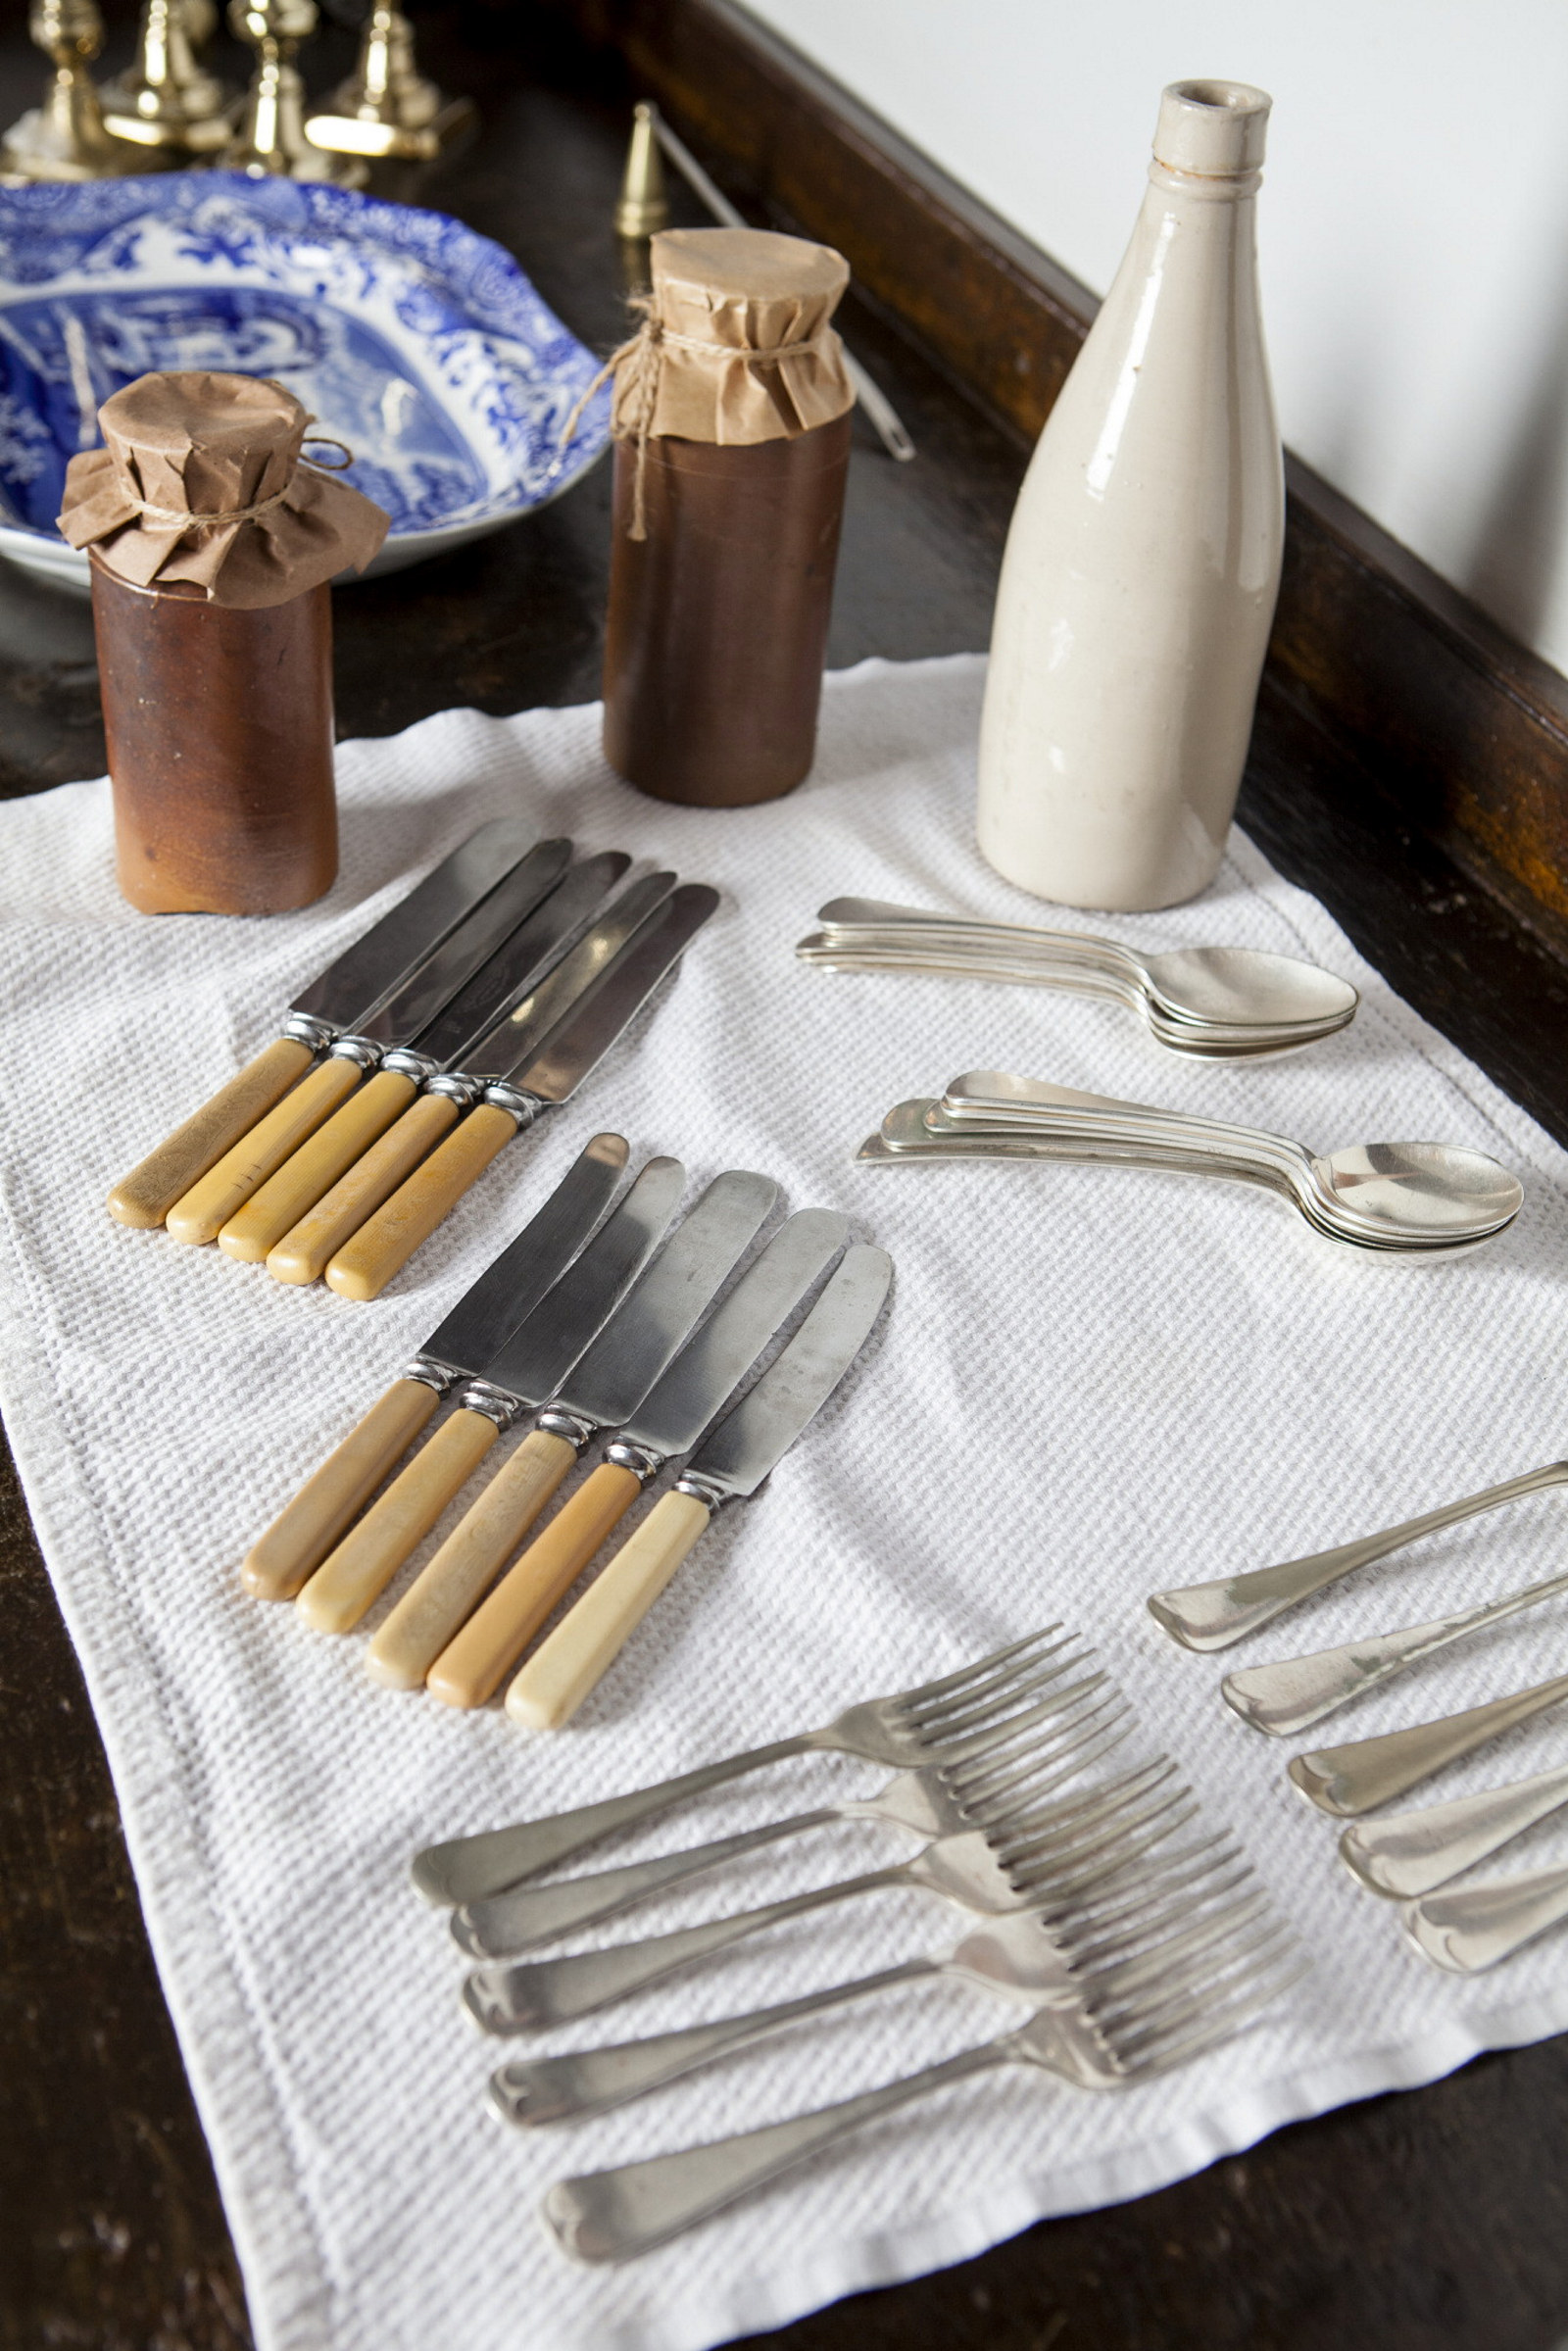 Cutlery and condiments laid out on cloth.